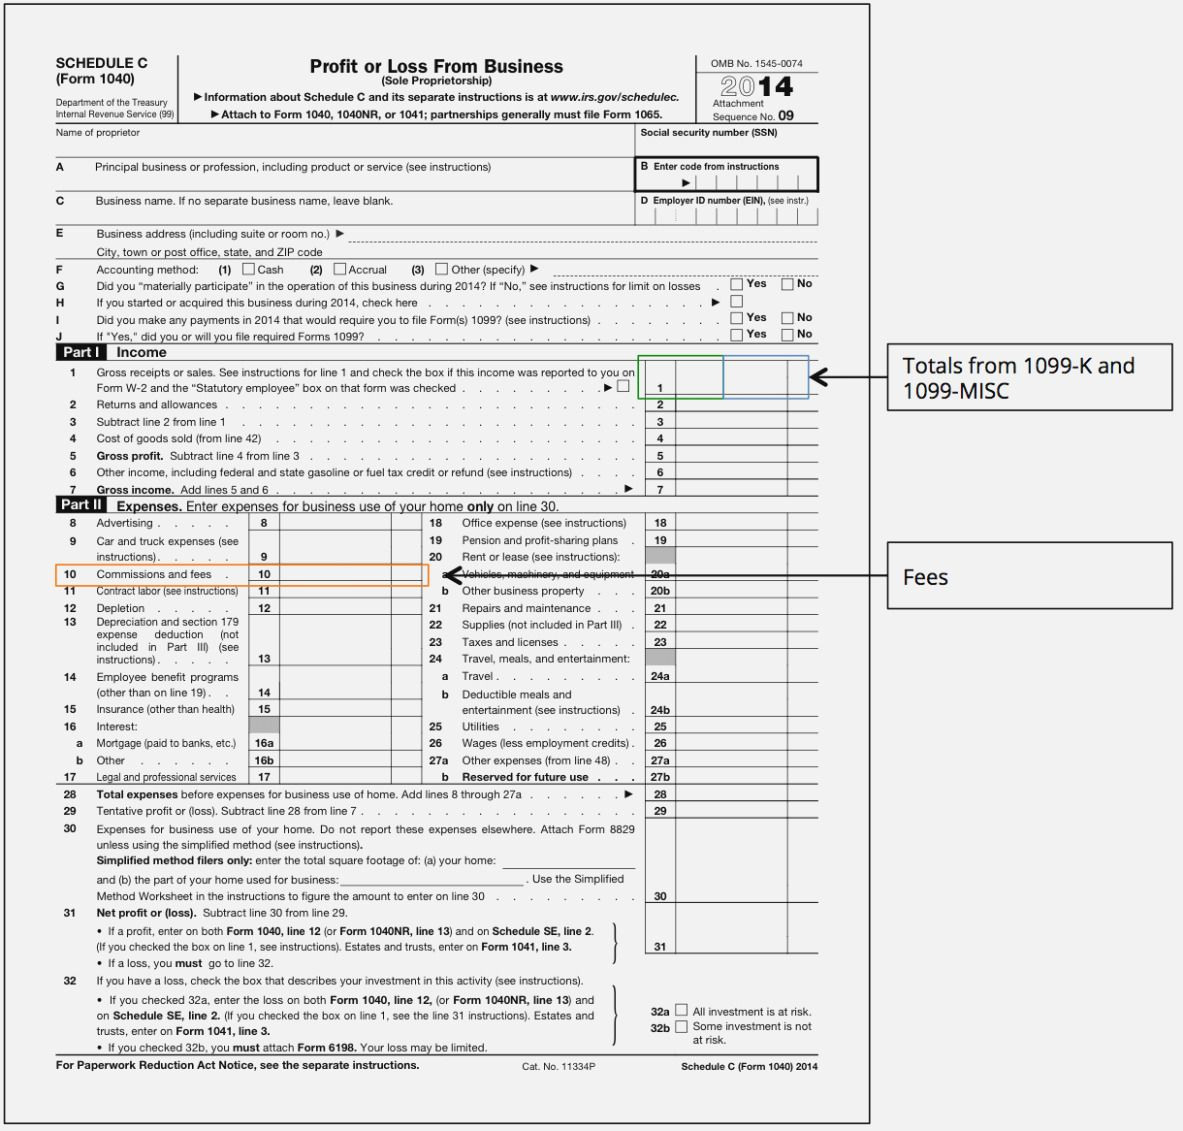 Filing Your Taxes Worksheet Answers